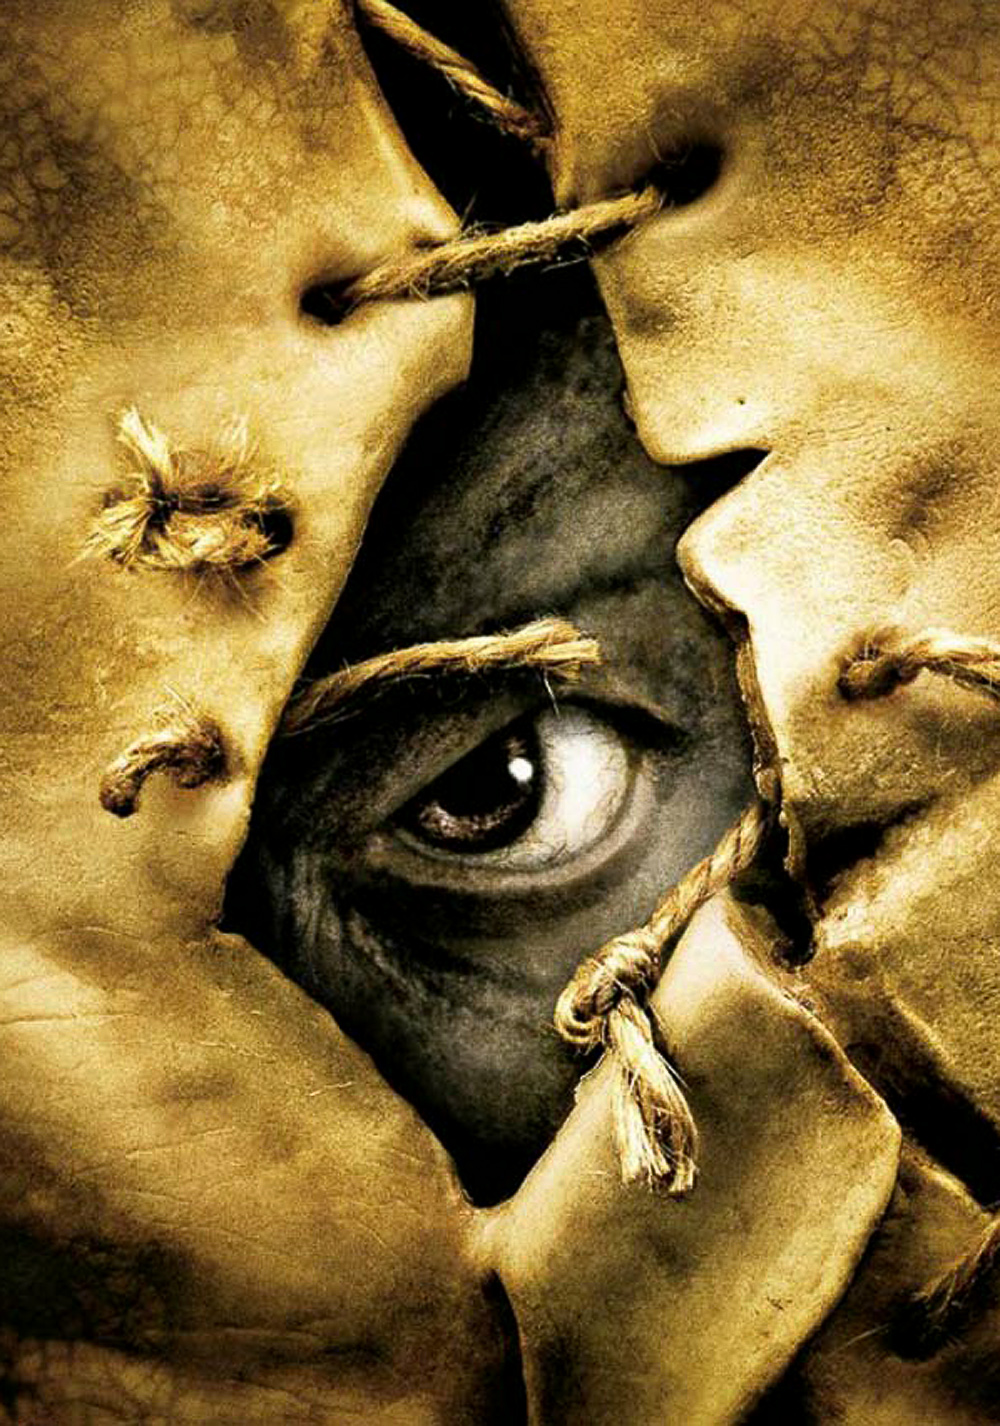 Jeepers Creepers Images. 